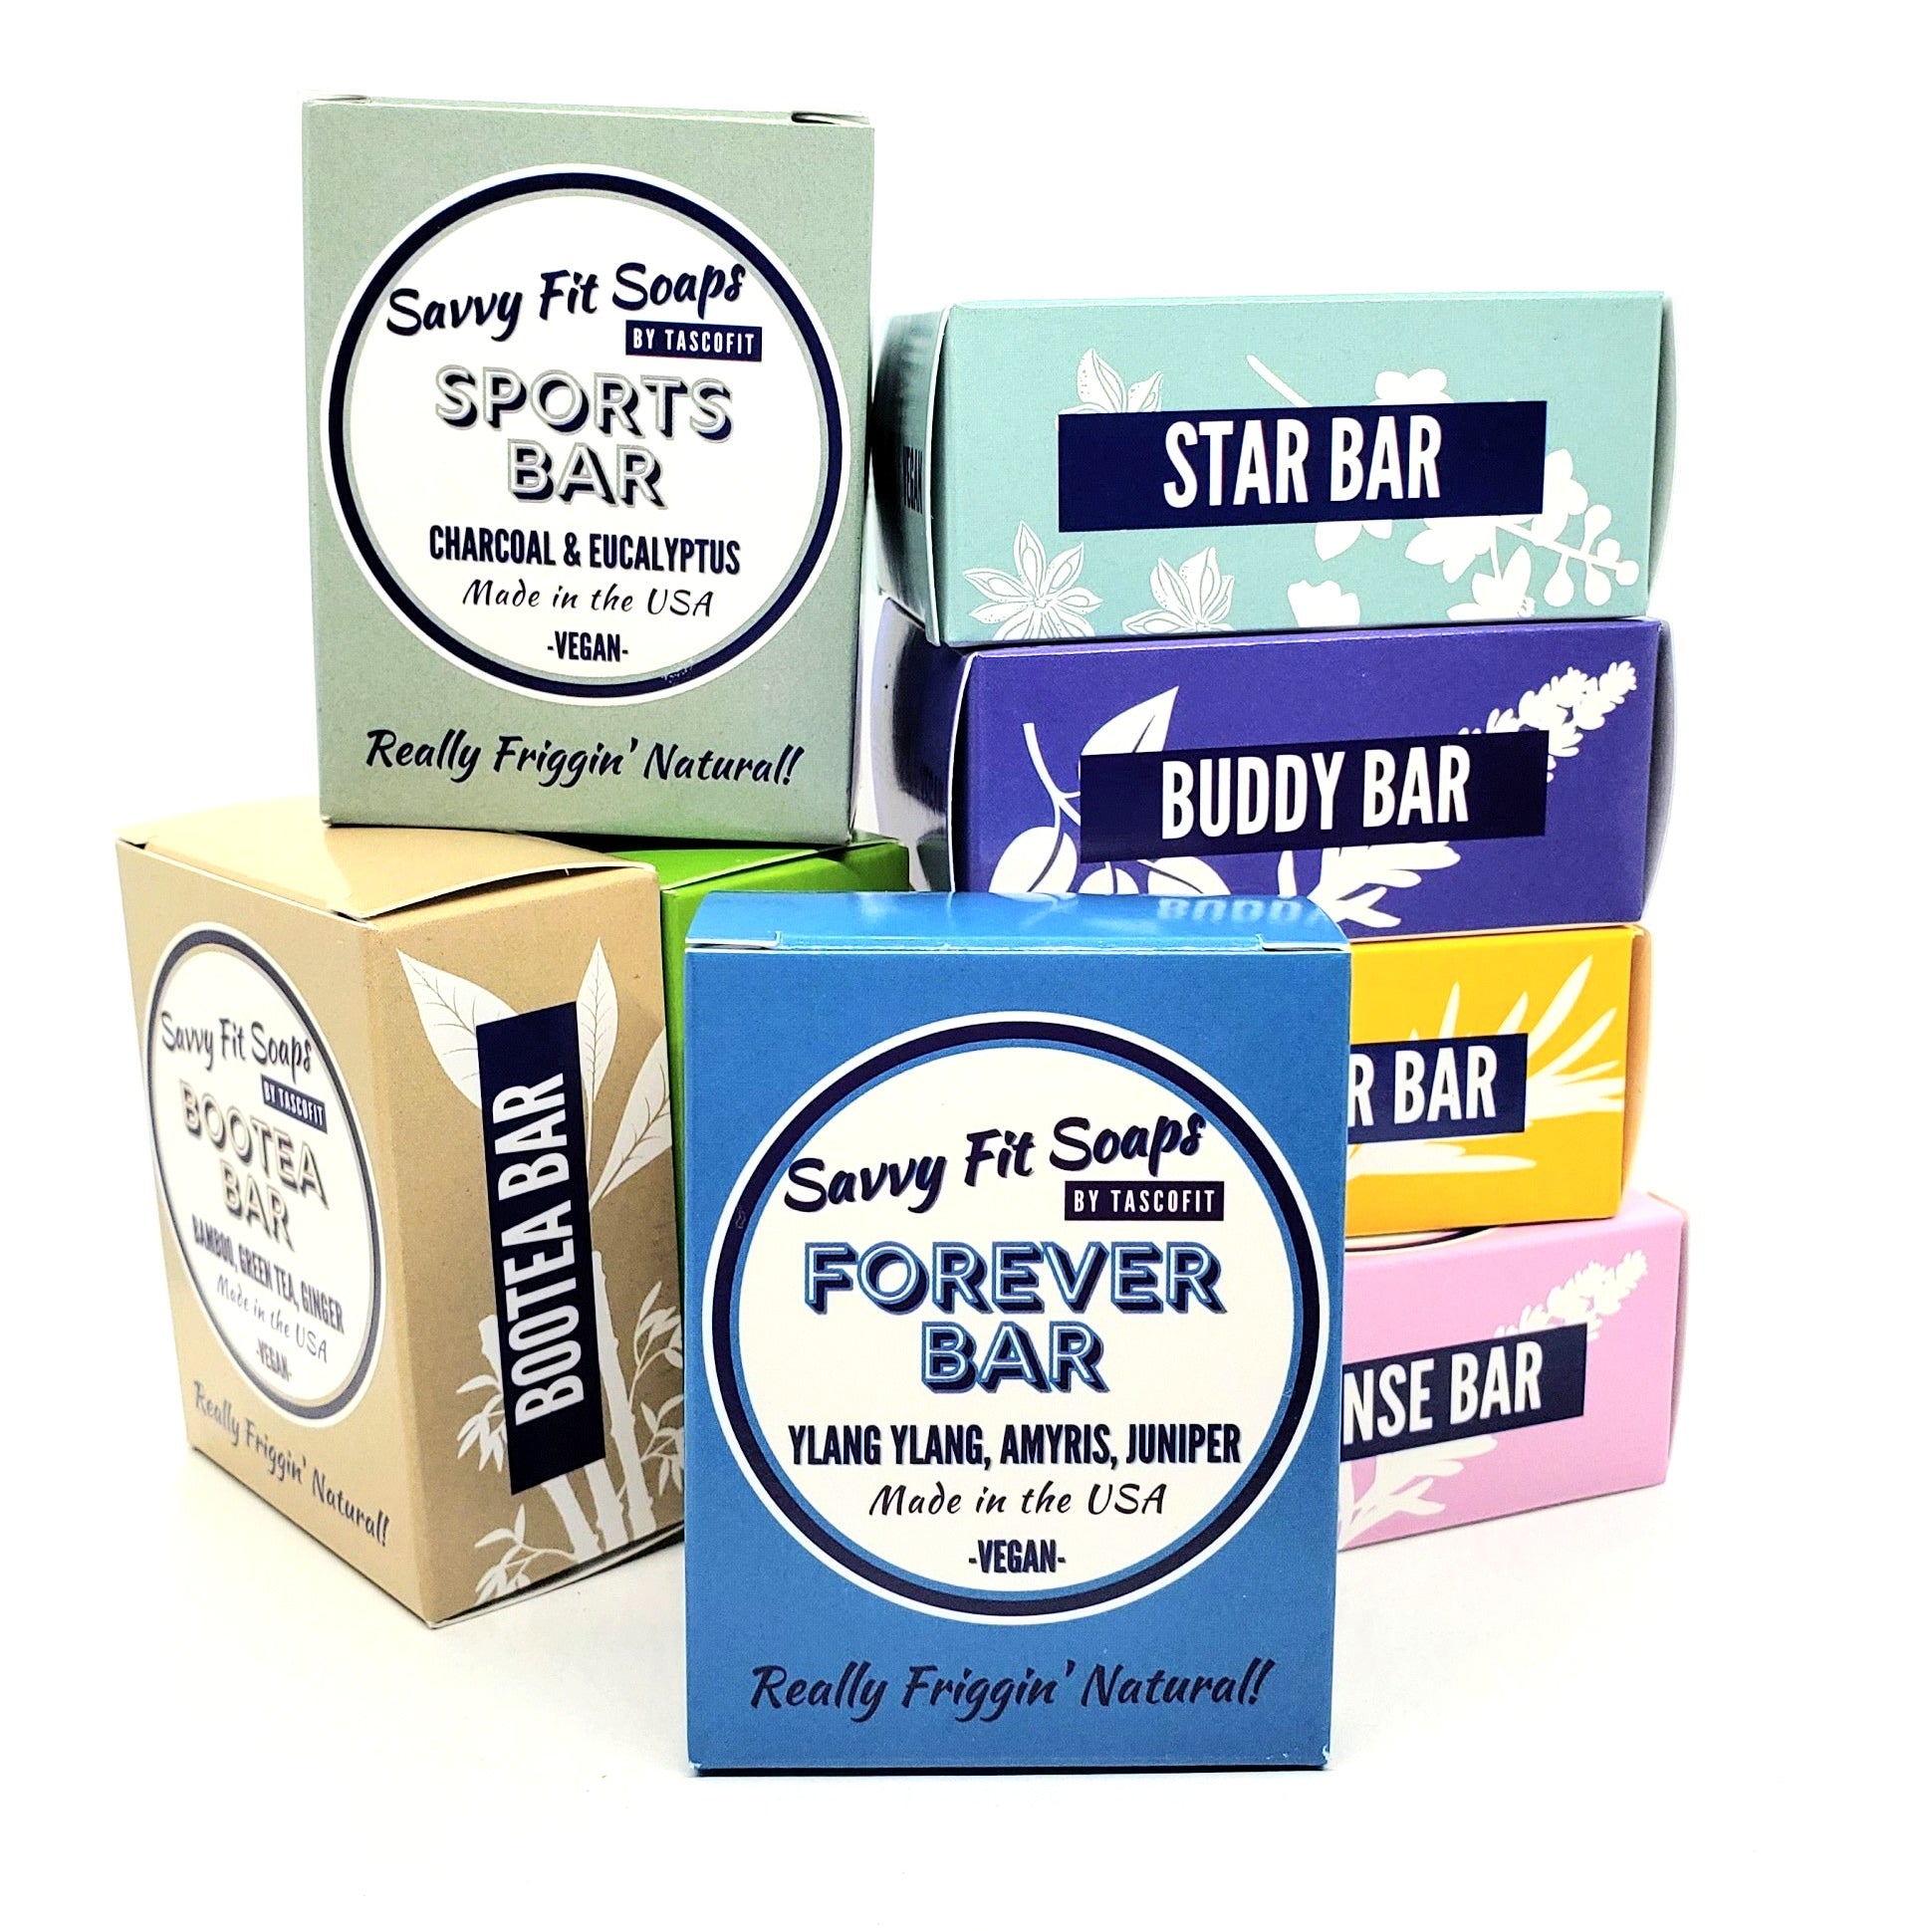 Savvy Fit Soaps